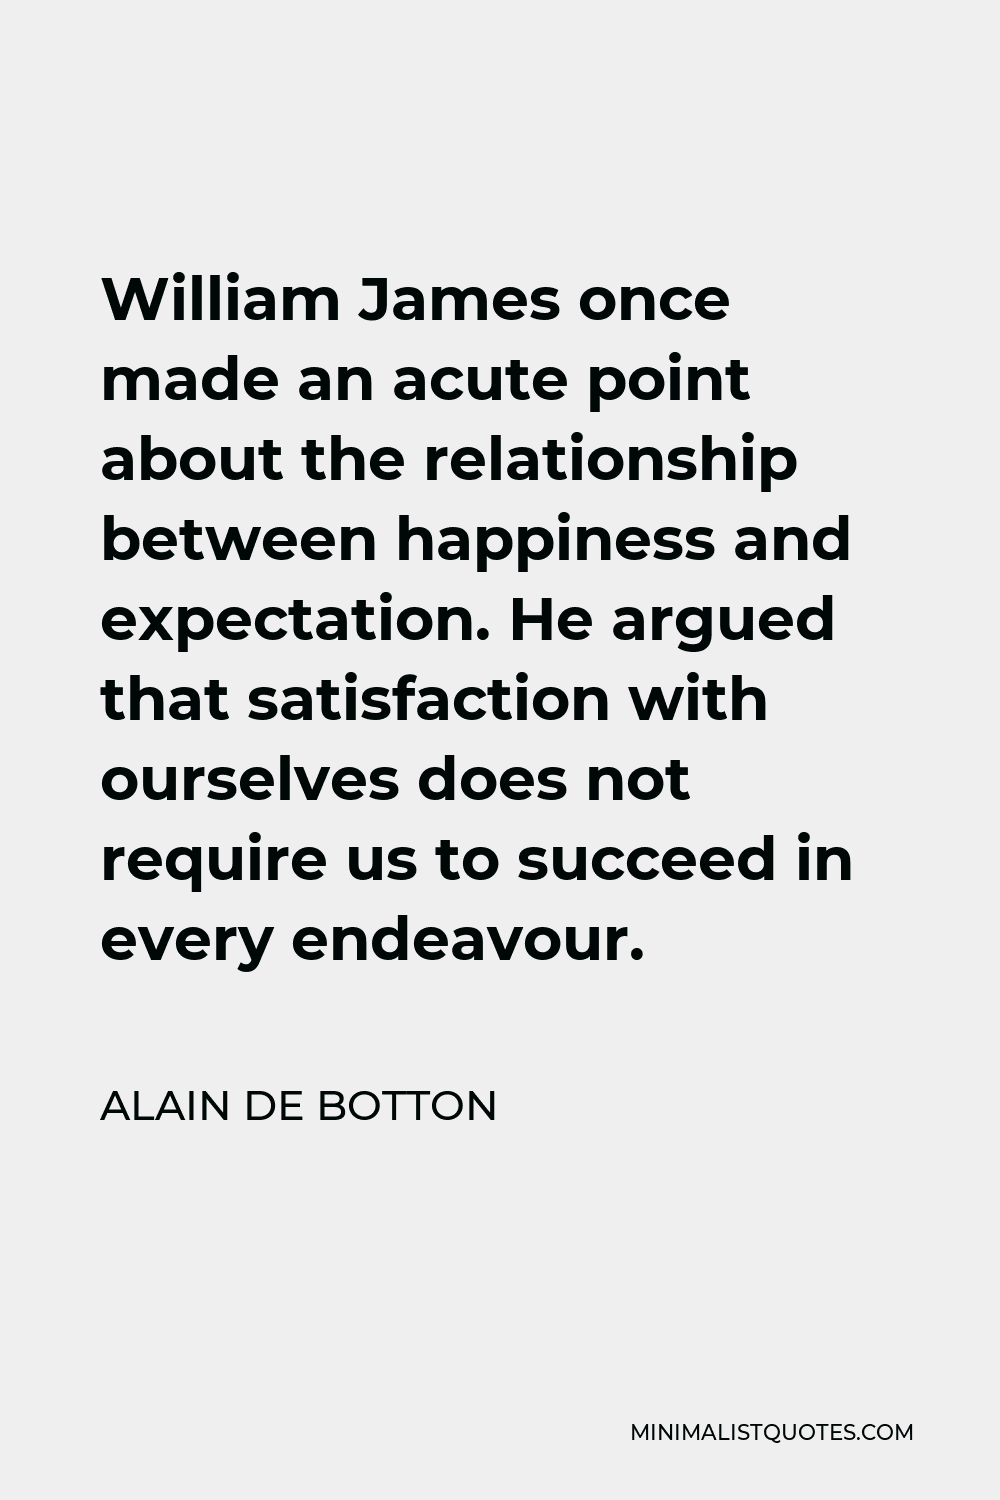 Alain de Botton Quote - William James once made an acute point about the relationship between happiness and expectation. He argued that satisfaction with ourselves does not require us to succeed in every endeavour.